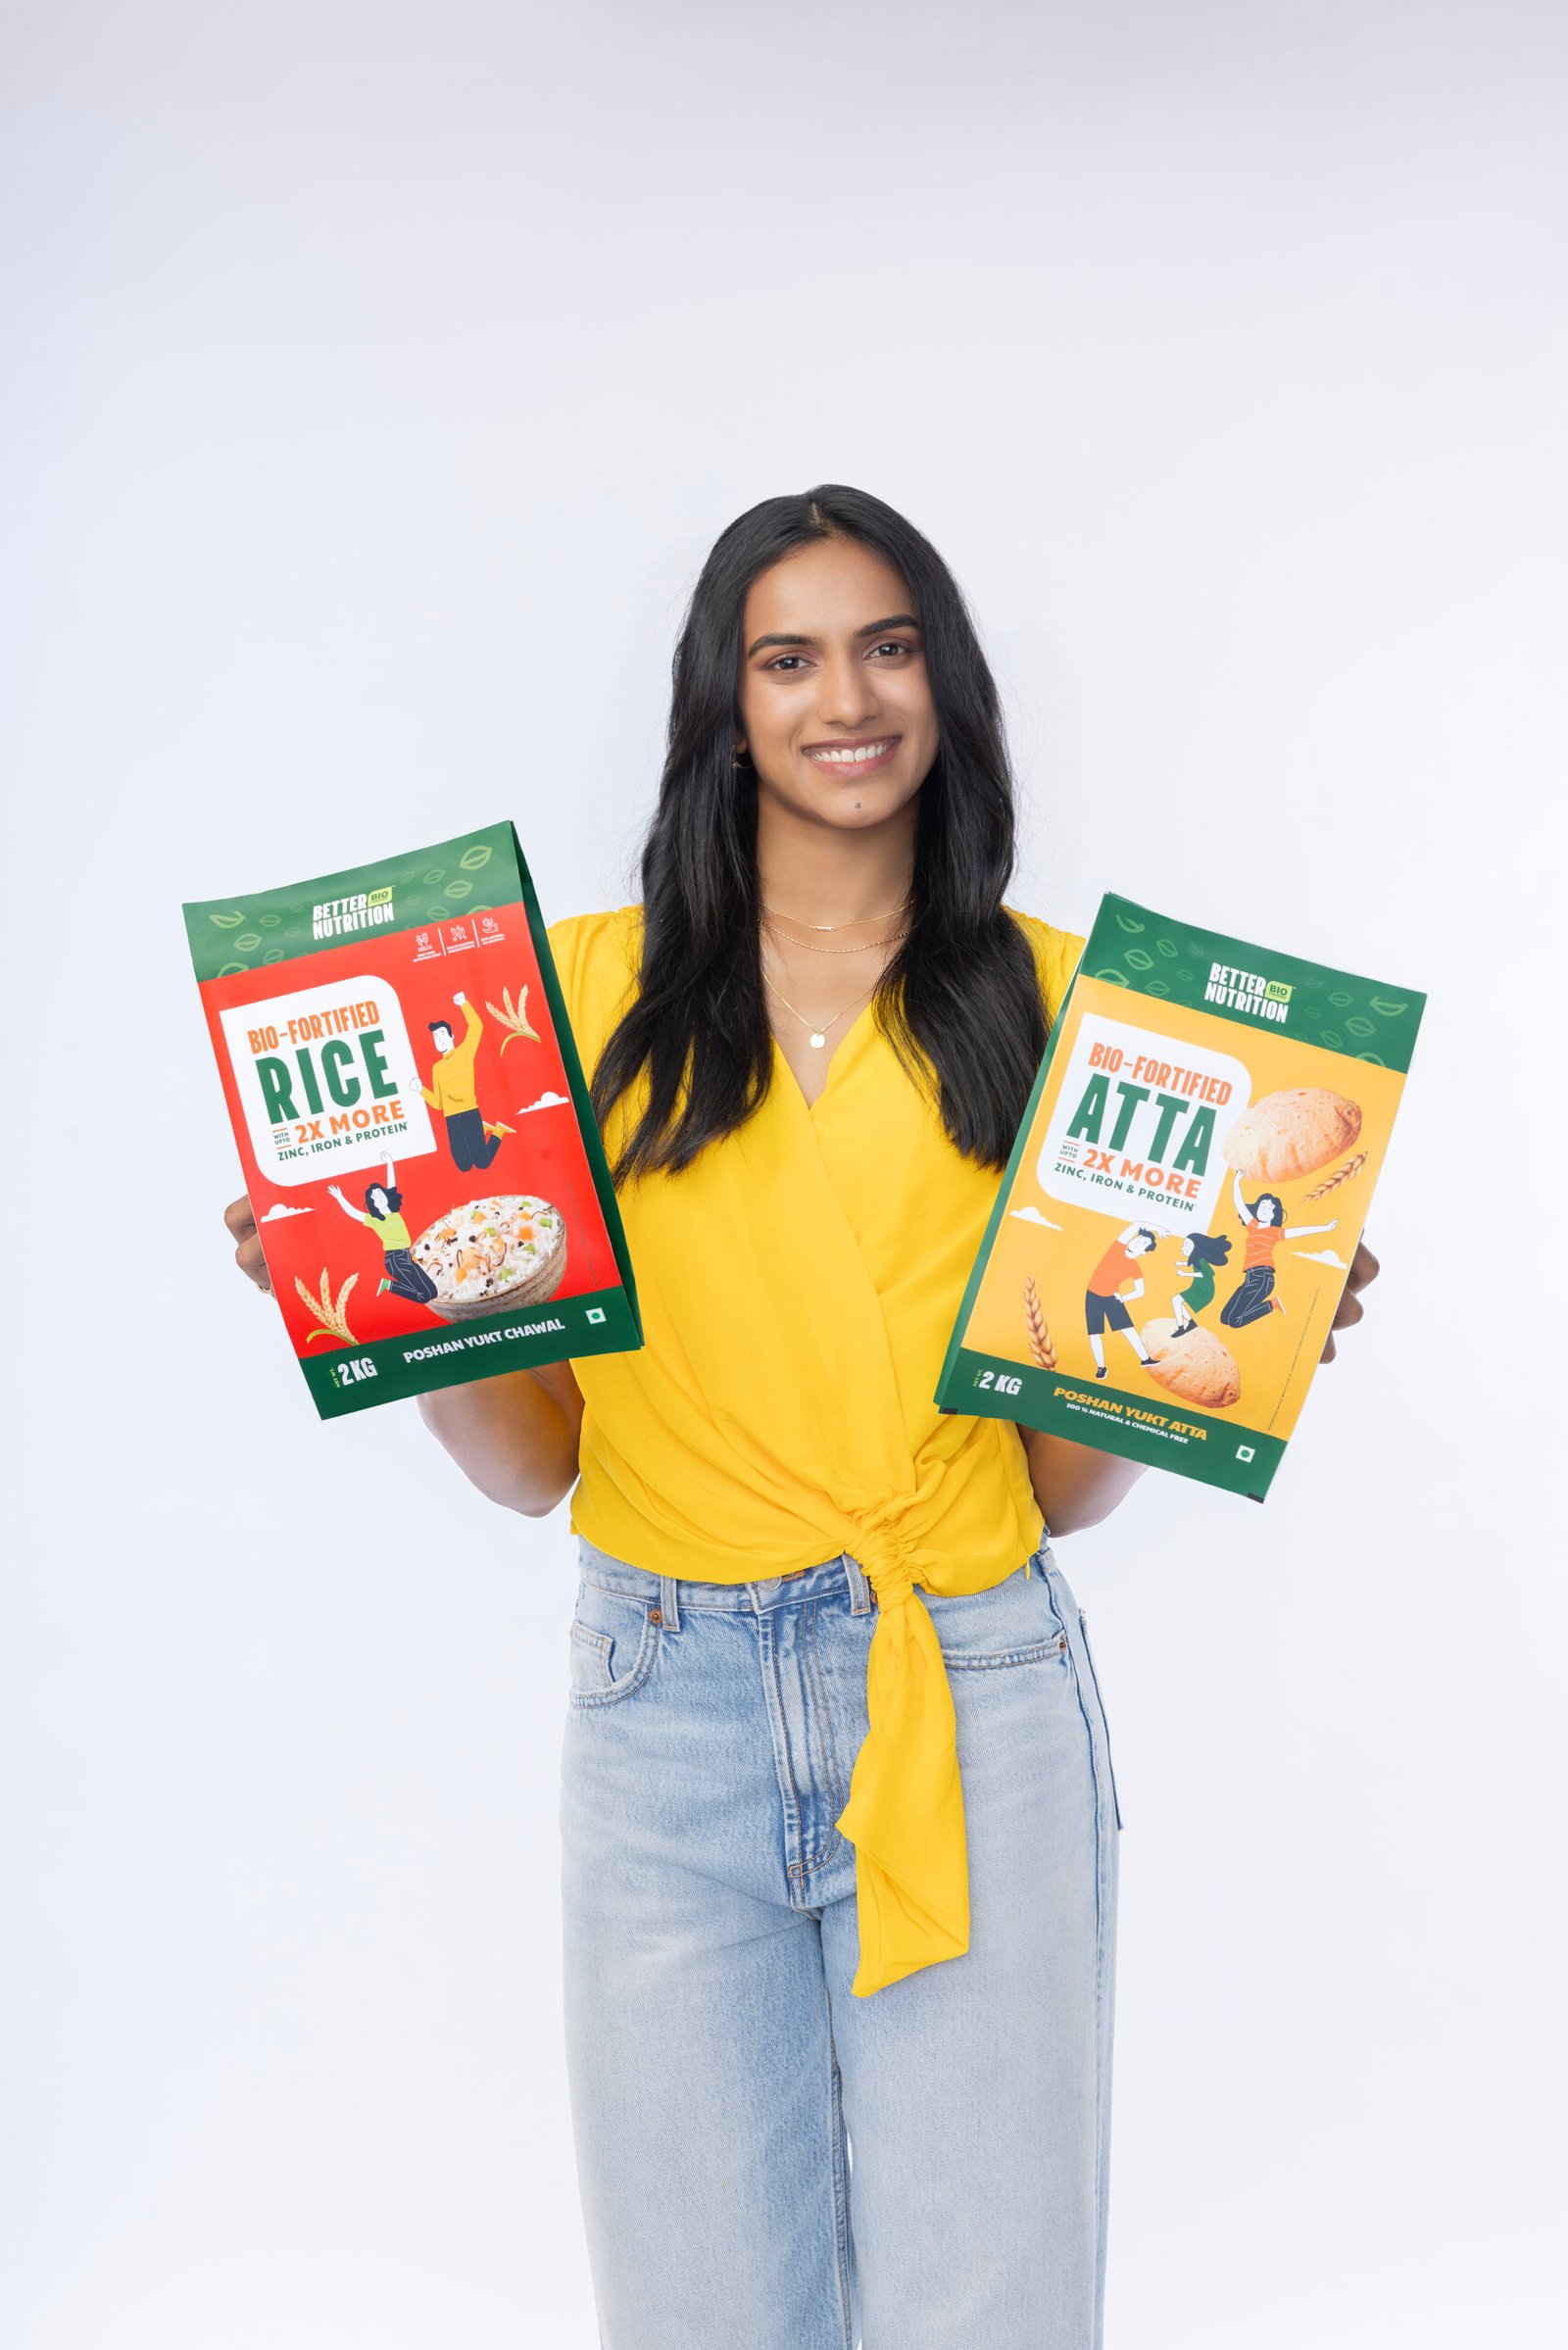 PV Sindhu invests in biofortified food brand Better Nutrition